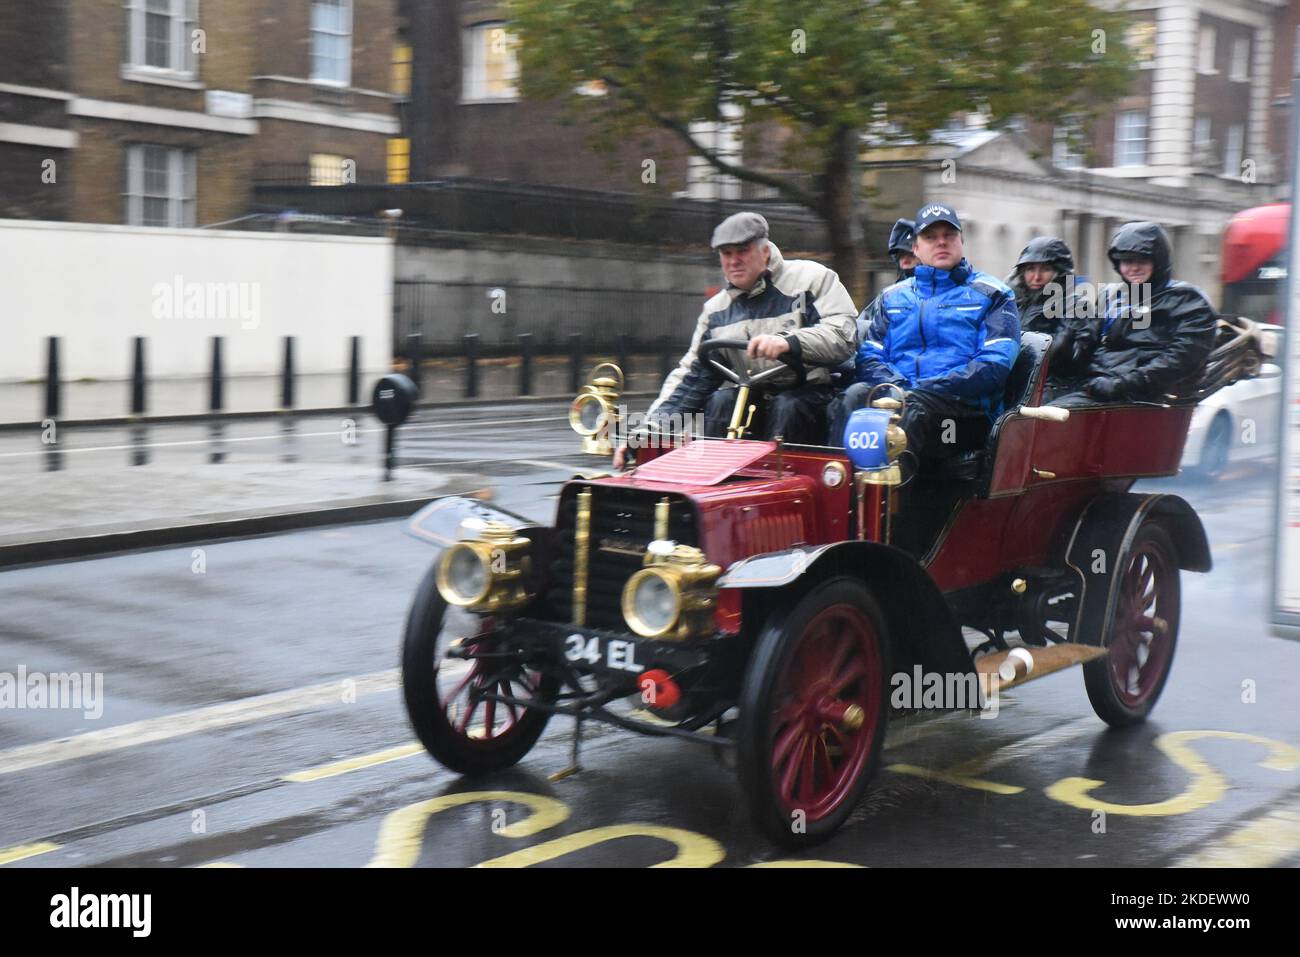 London, UK. 06th Nov, 2022. - [ ] Participants in the annual London to Brighton veteran car run have been faced with torrential rain. Many of the an kent vehicles are open top and the passengers are having done wet weather gear. Several did not make it out of Whitehall where a sudden heavy shower has left The road running like a river rather than a road. Vehicles are having to slow down a swerve to avoid the deep puddles. Credit: graham mitchell/Alamy Live News Credit: graham mitchell/Alamy Live News Stock Photo